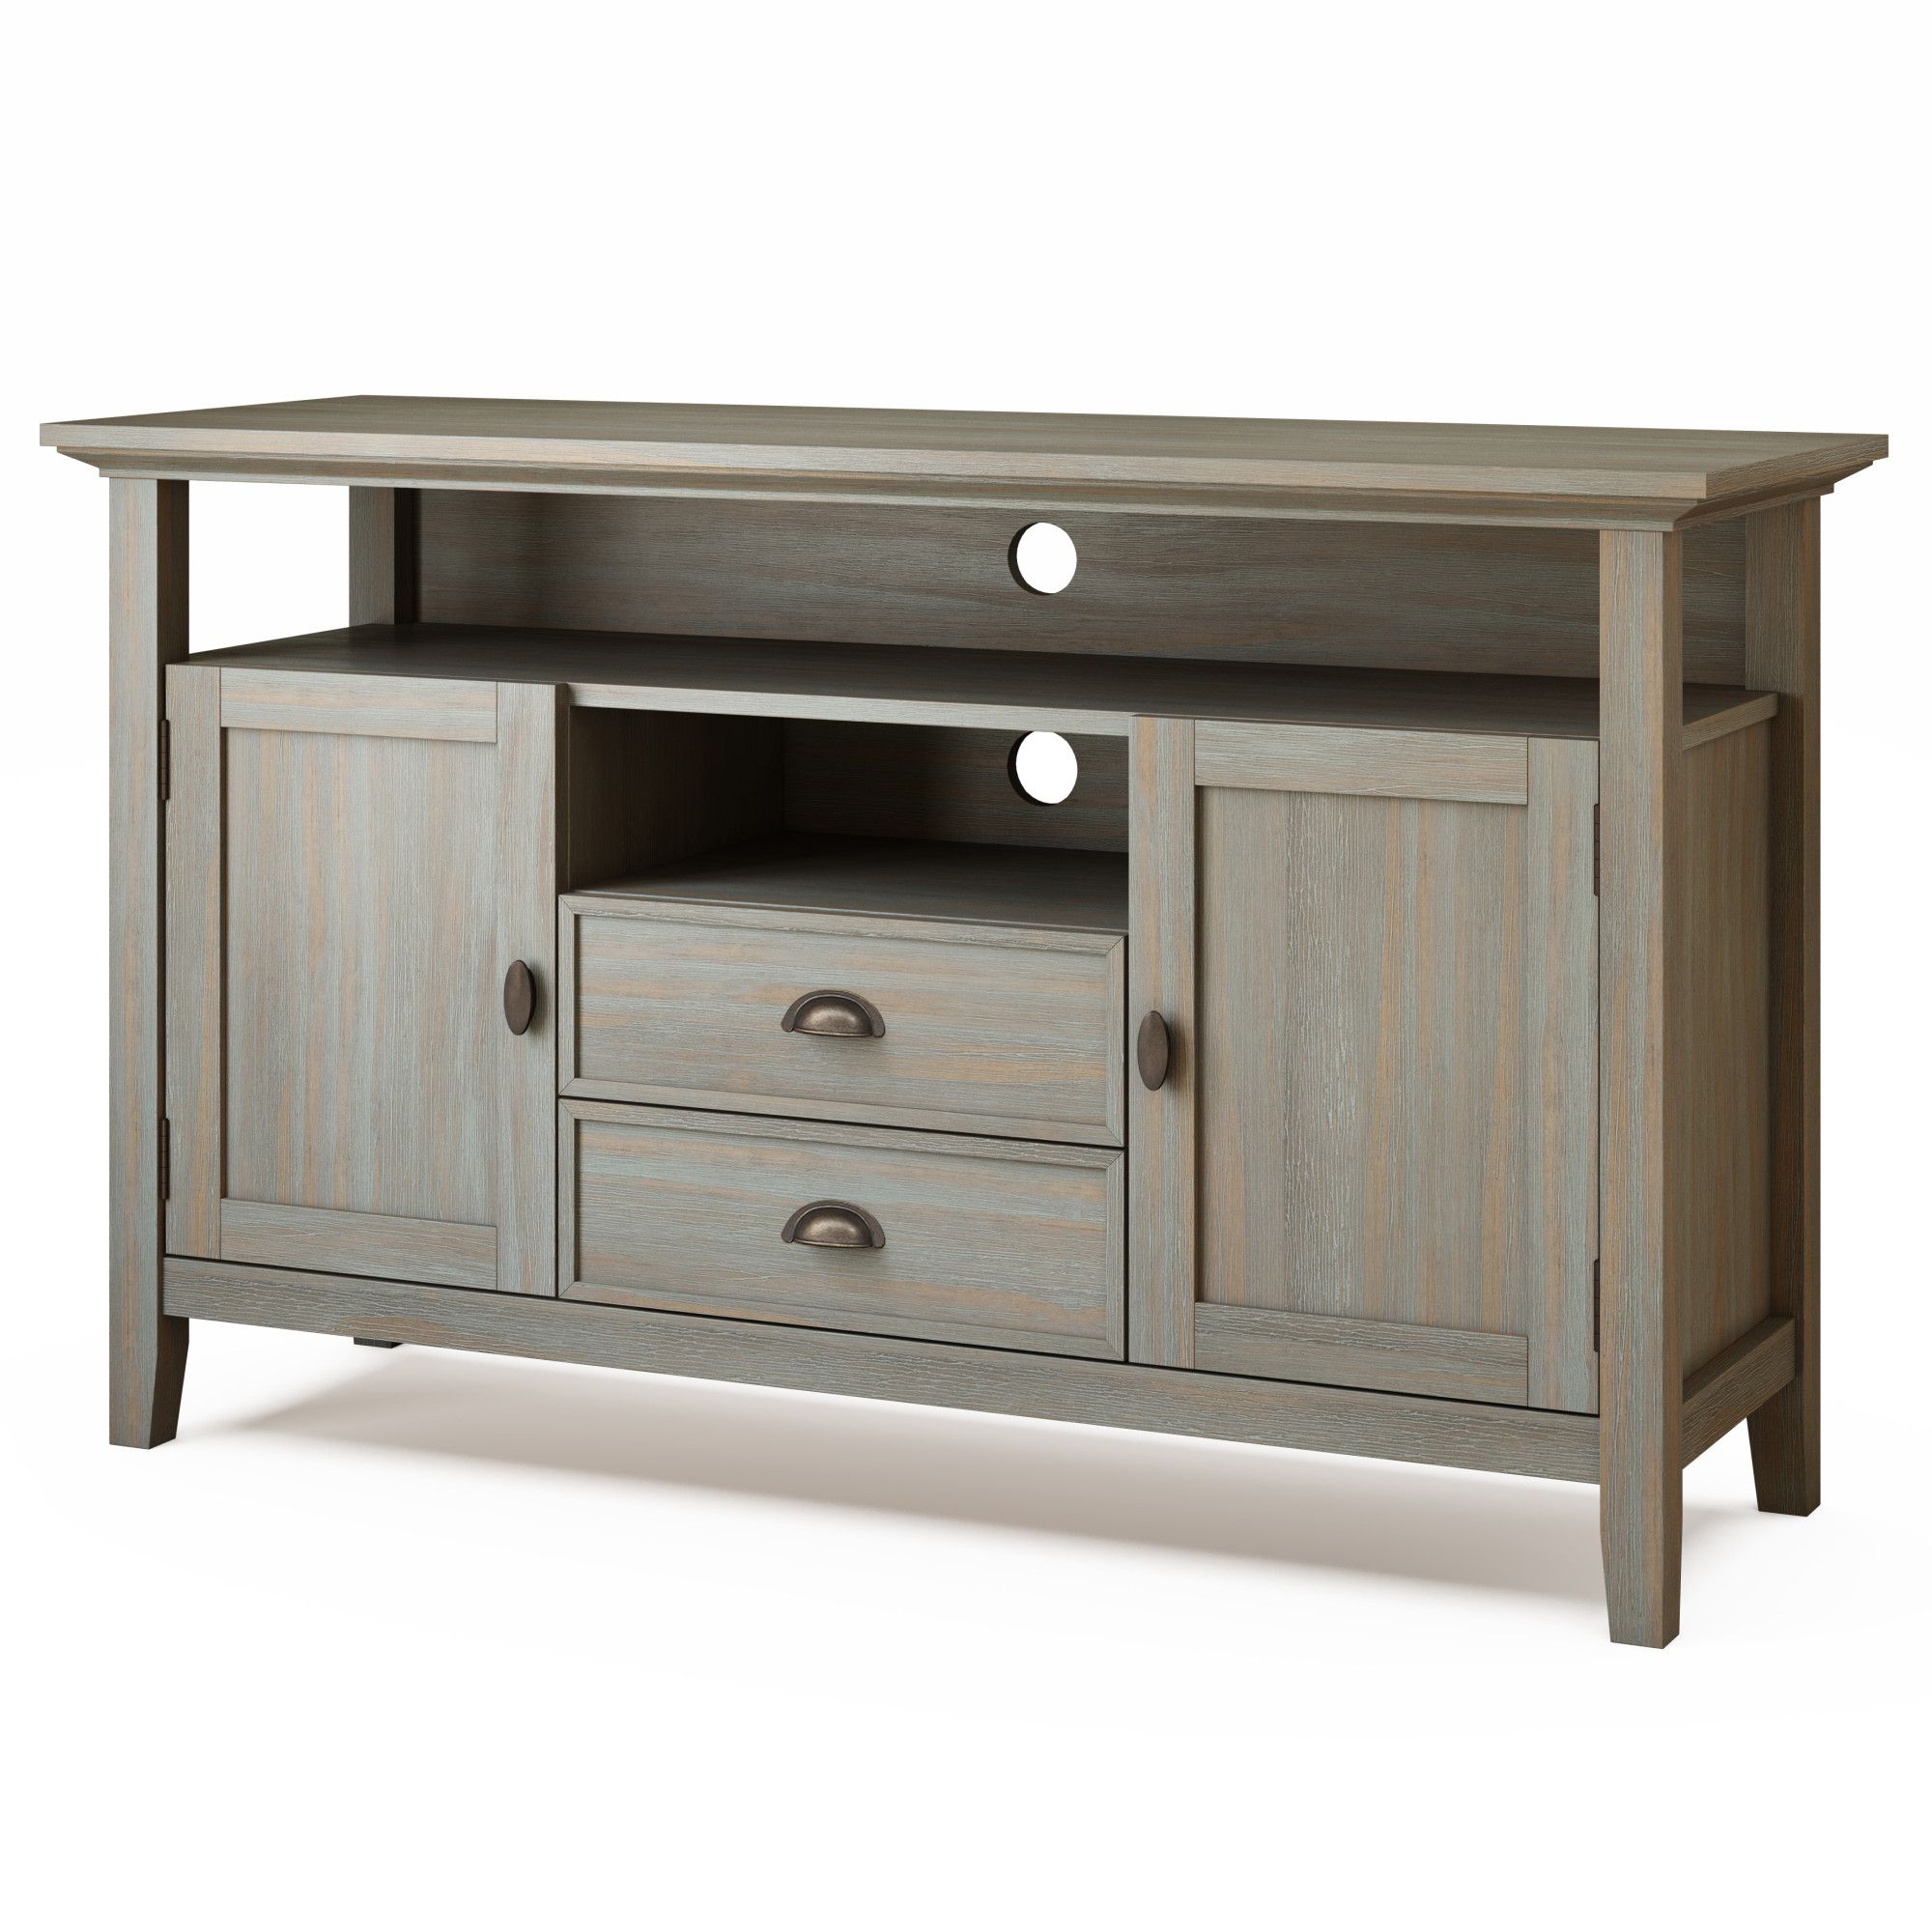 Brooklyn + Max Stanwick Solid Wood 54 Inch Wide Rustic Tv Throughout Harbor Wide Tv Stands (View 4 of 15)